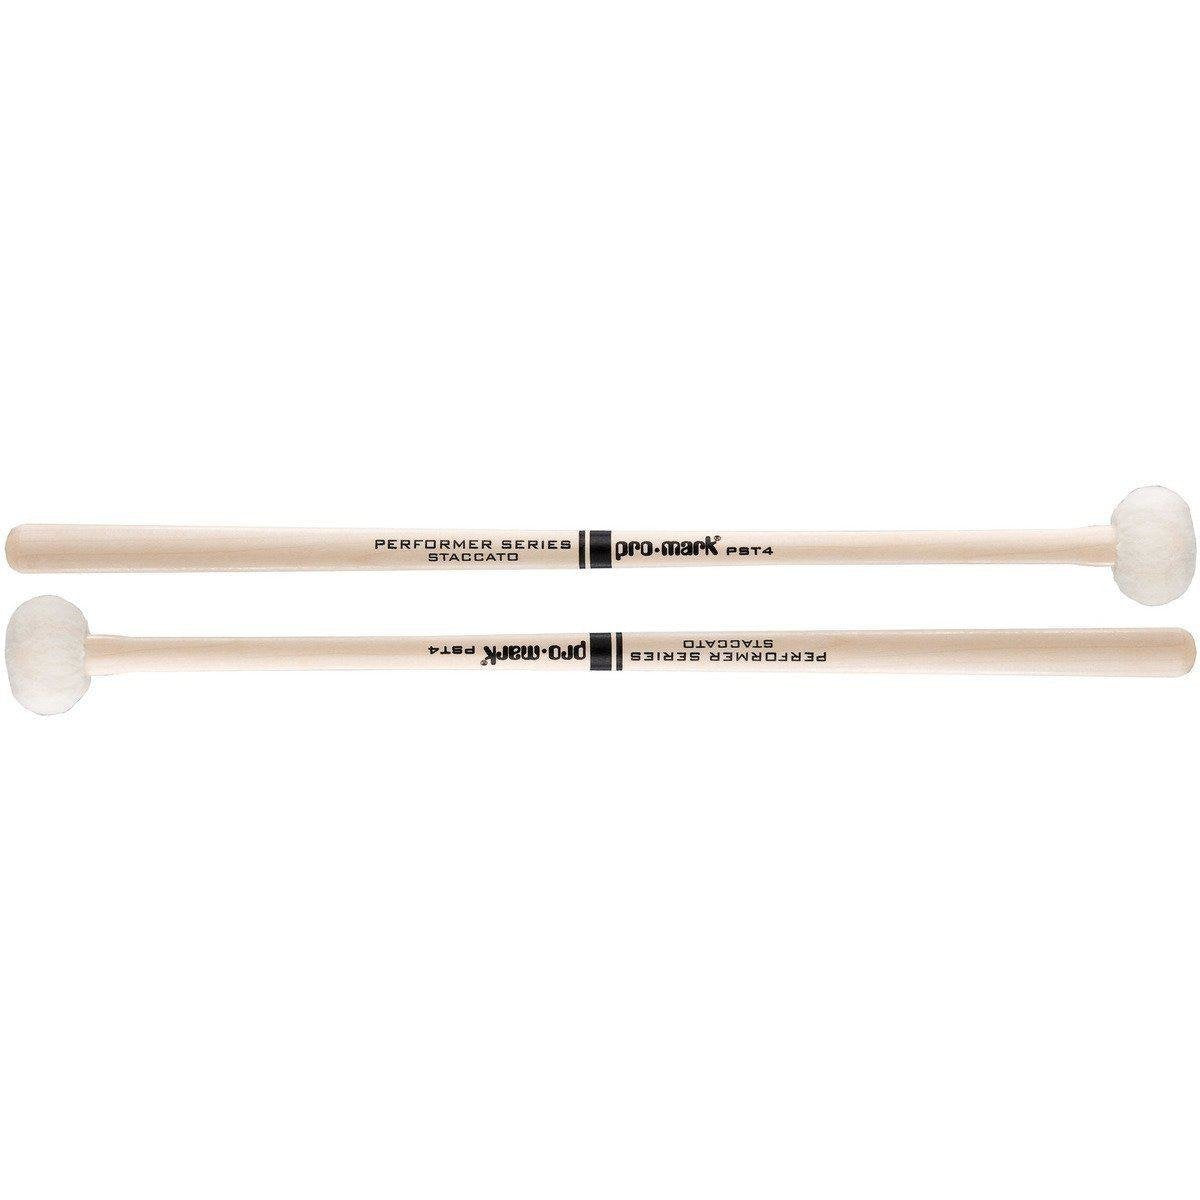 ProMark Performer Series Staccato PST4 Maple Timpani Mallets-Andy's Music